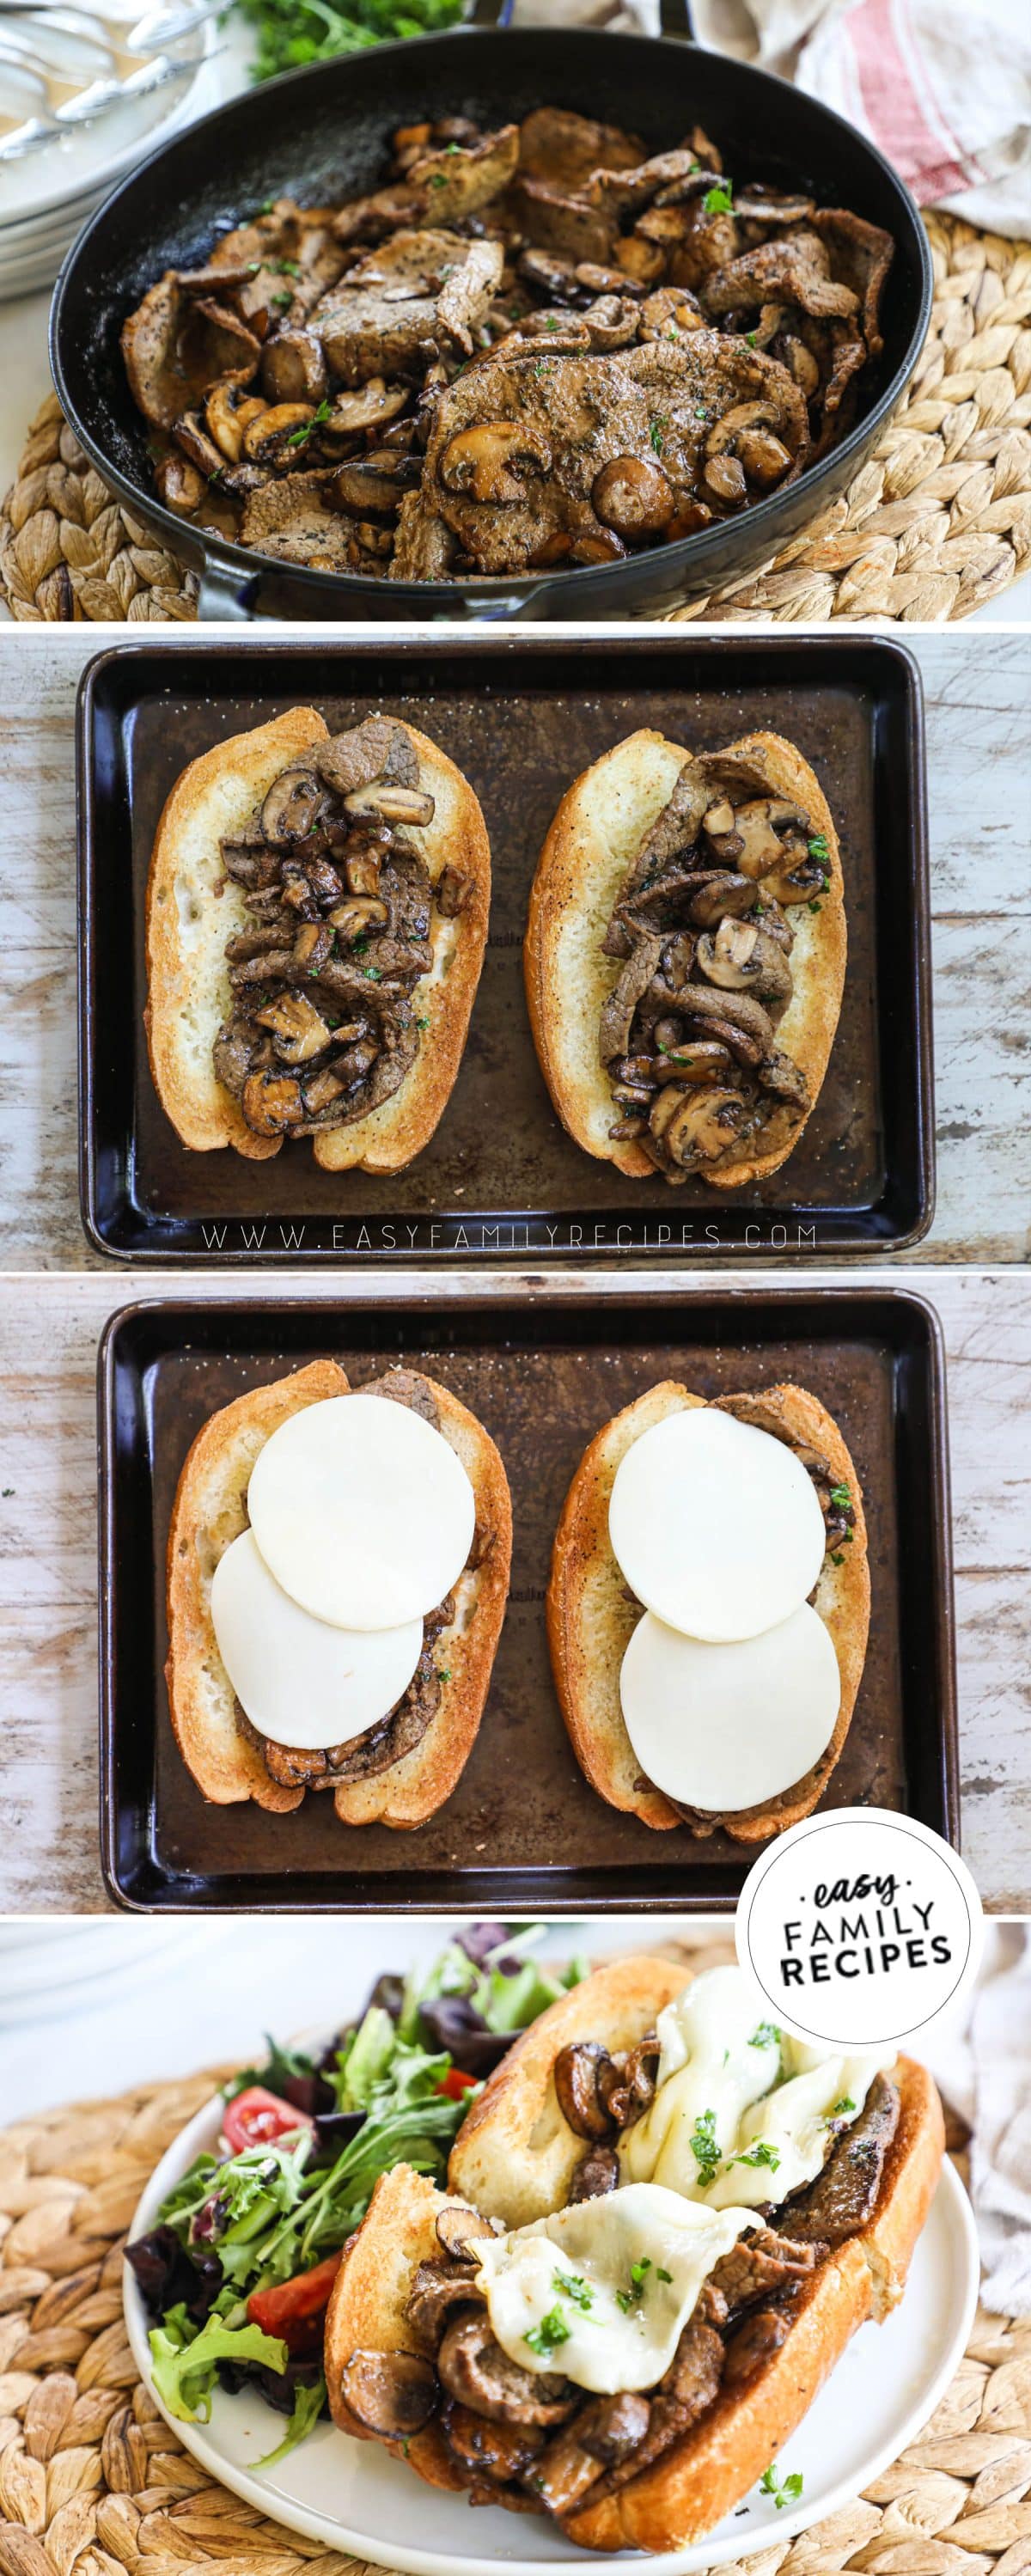 Steps to make a steak sandwich step 1 spread the garlic butter step 2 add the cooked steak step 3 add the cheese step 4 cook in the oven until the cheese is melted.